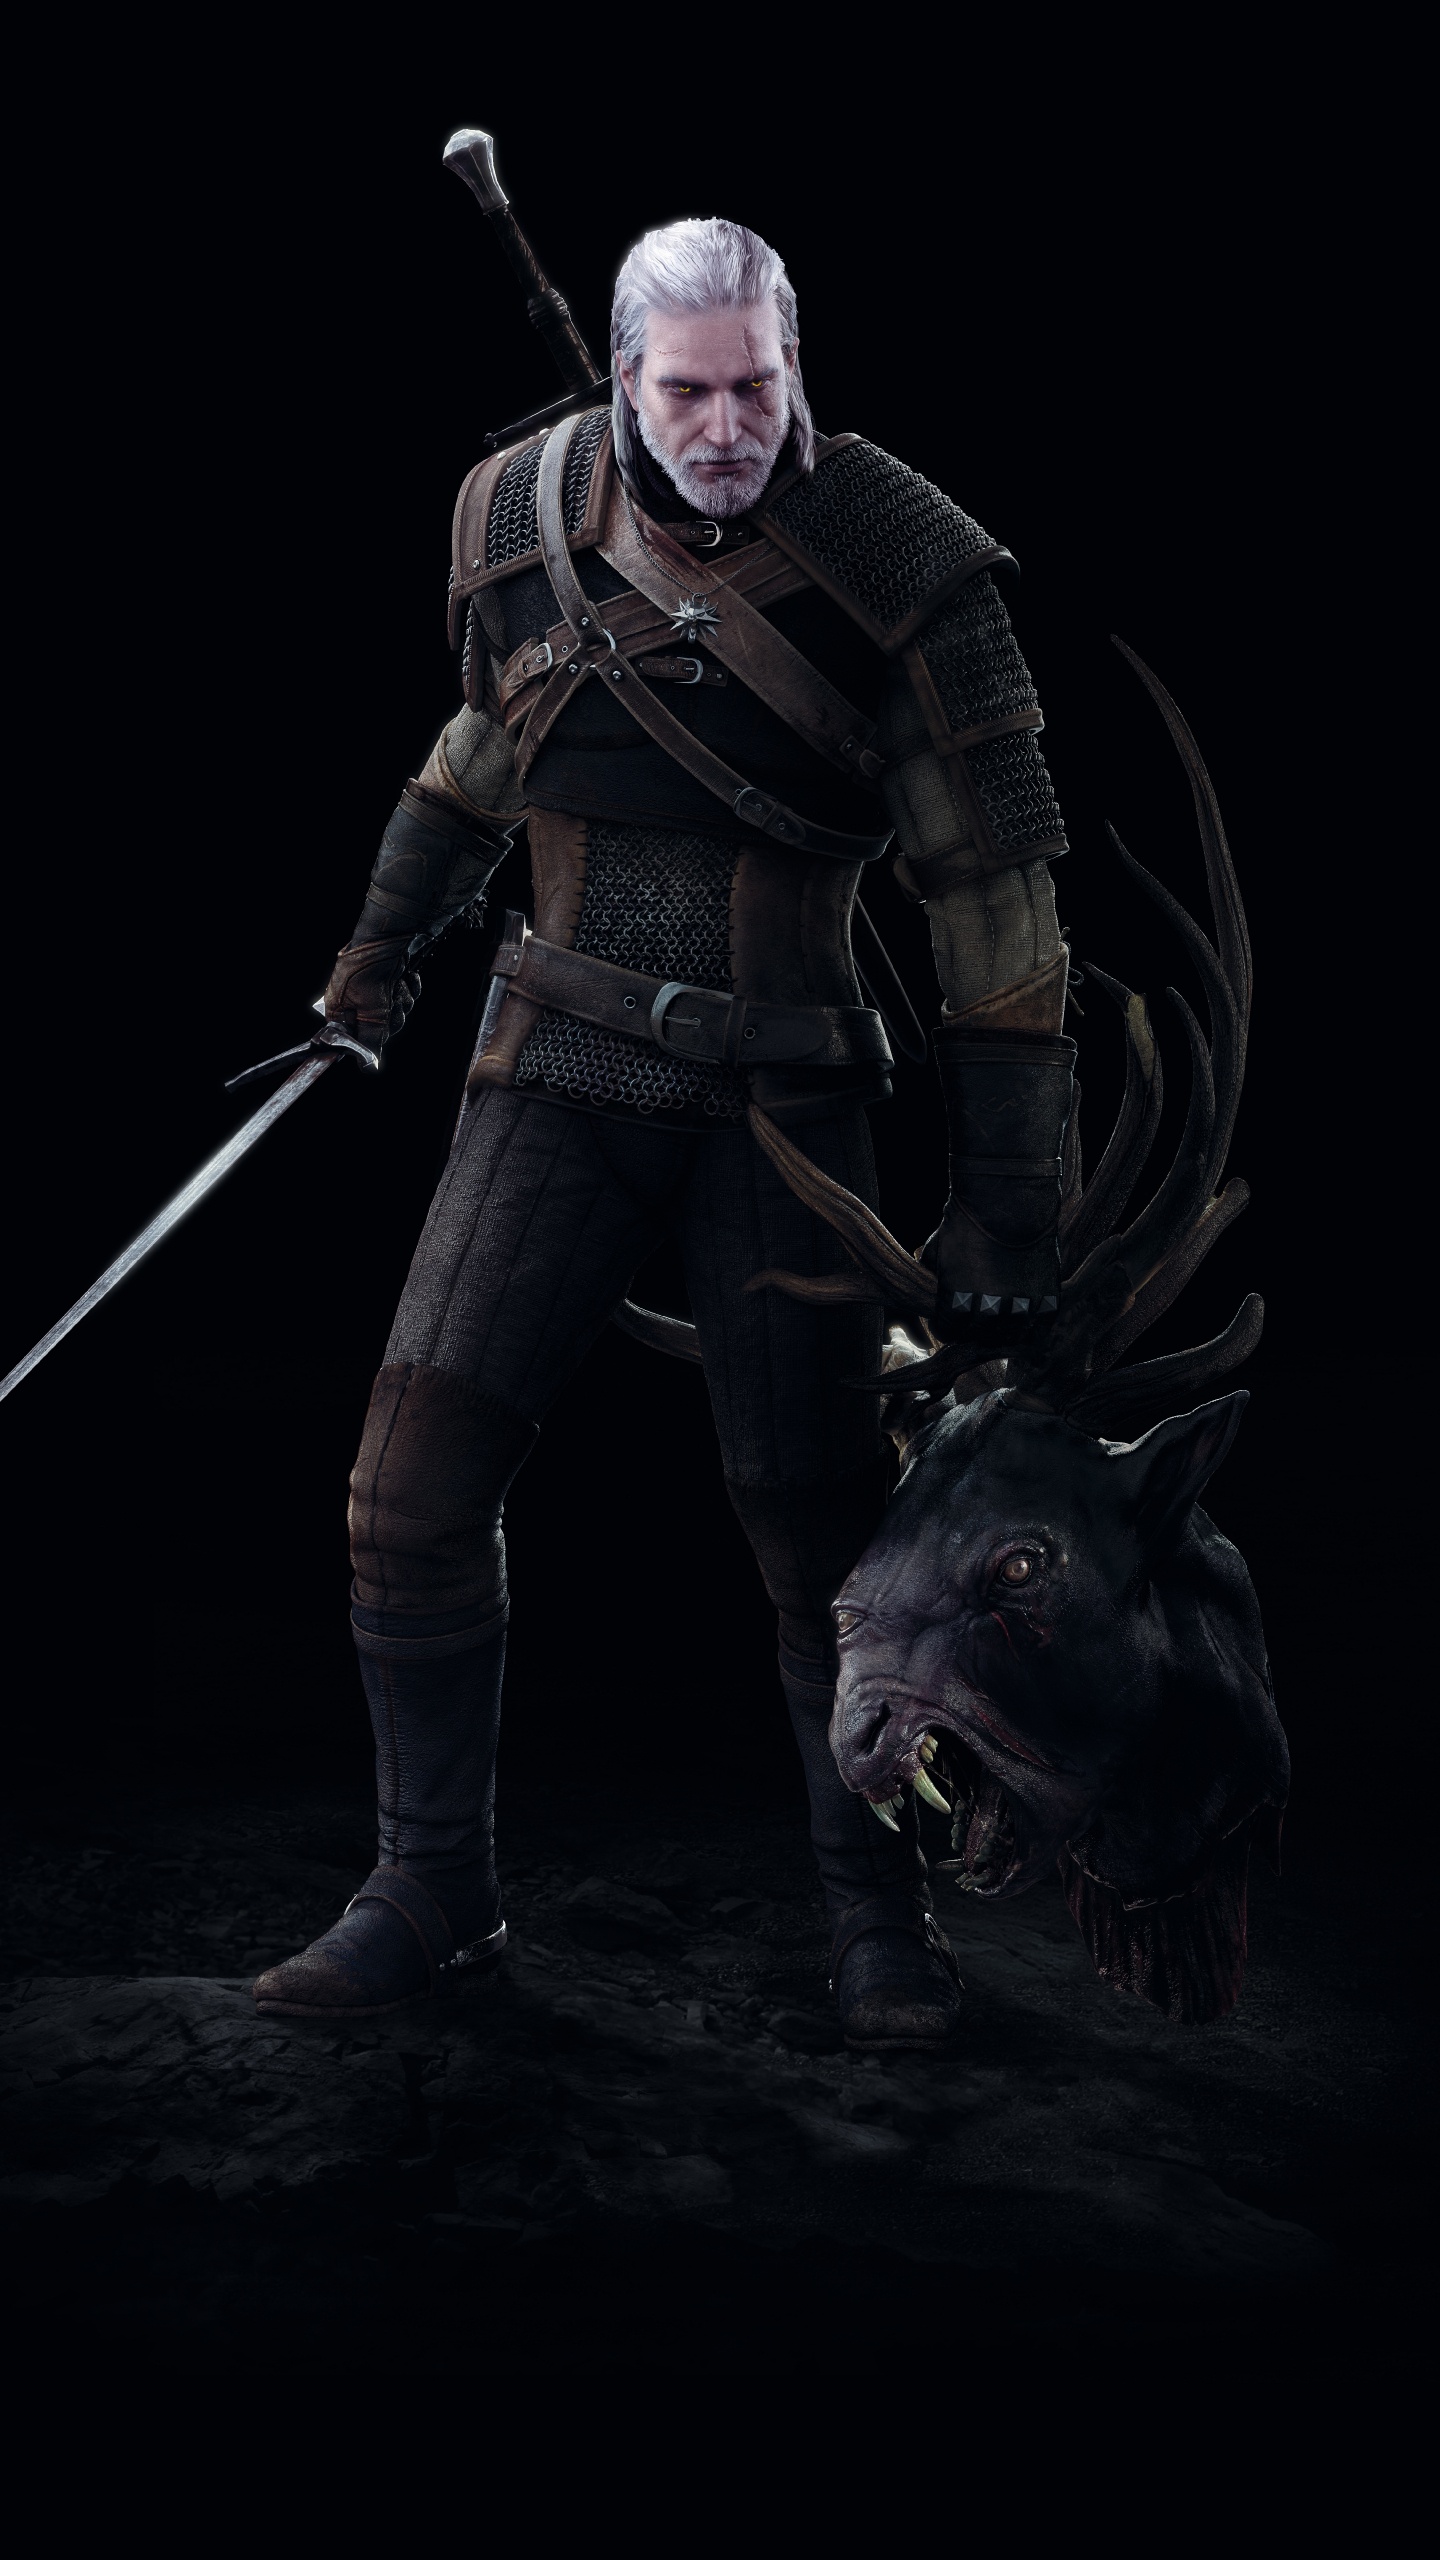 The Witcher 3 Wild Hunt, Geralt of Rivia, Darkness, Action Figure, Outerwear. Wallpaper in 1440x2560 Resolution